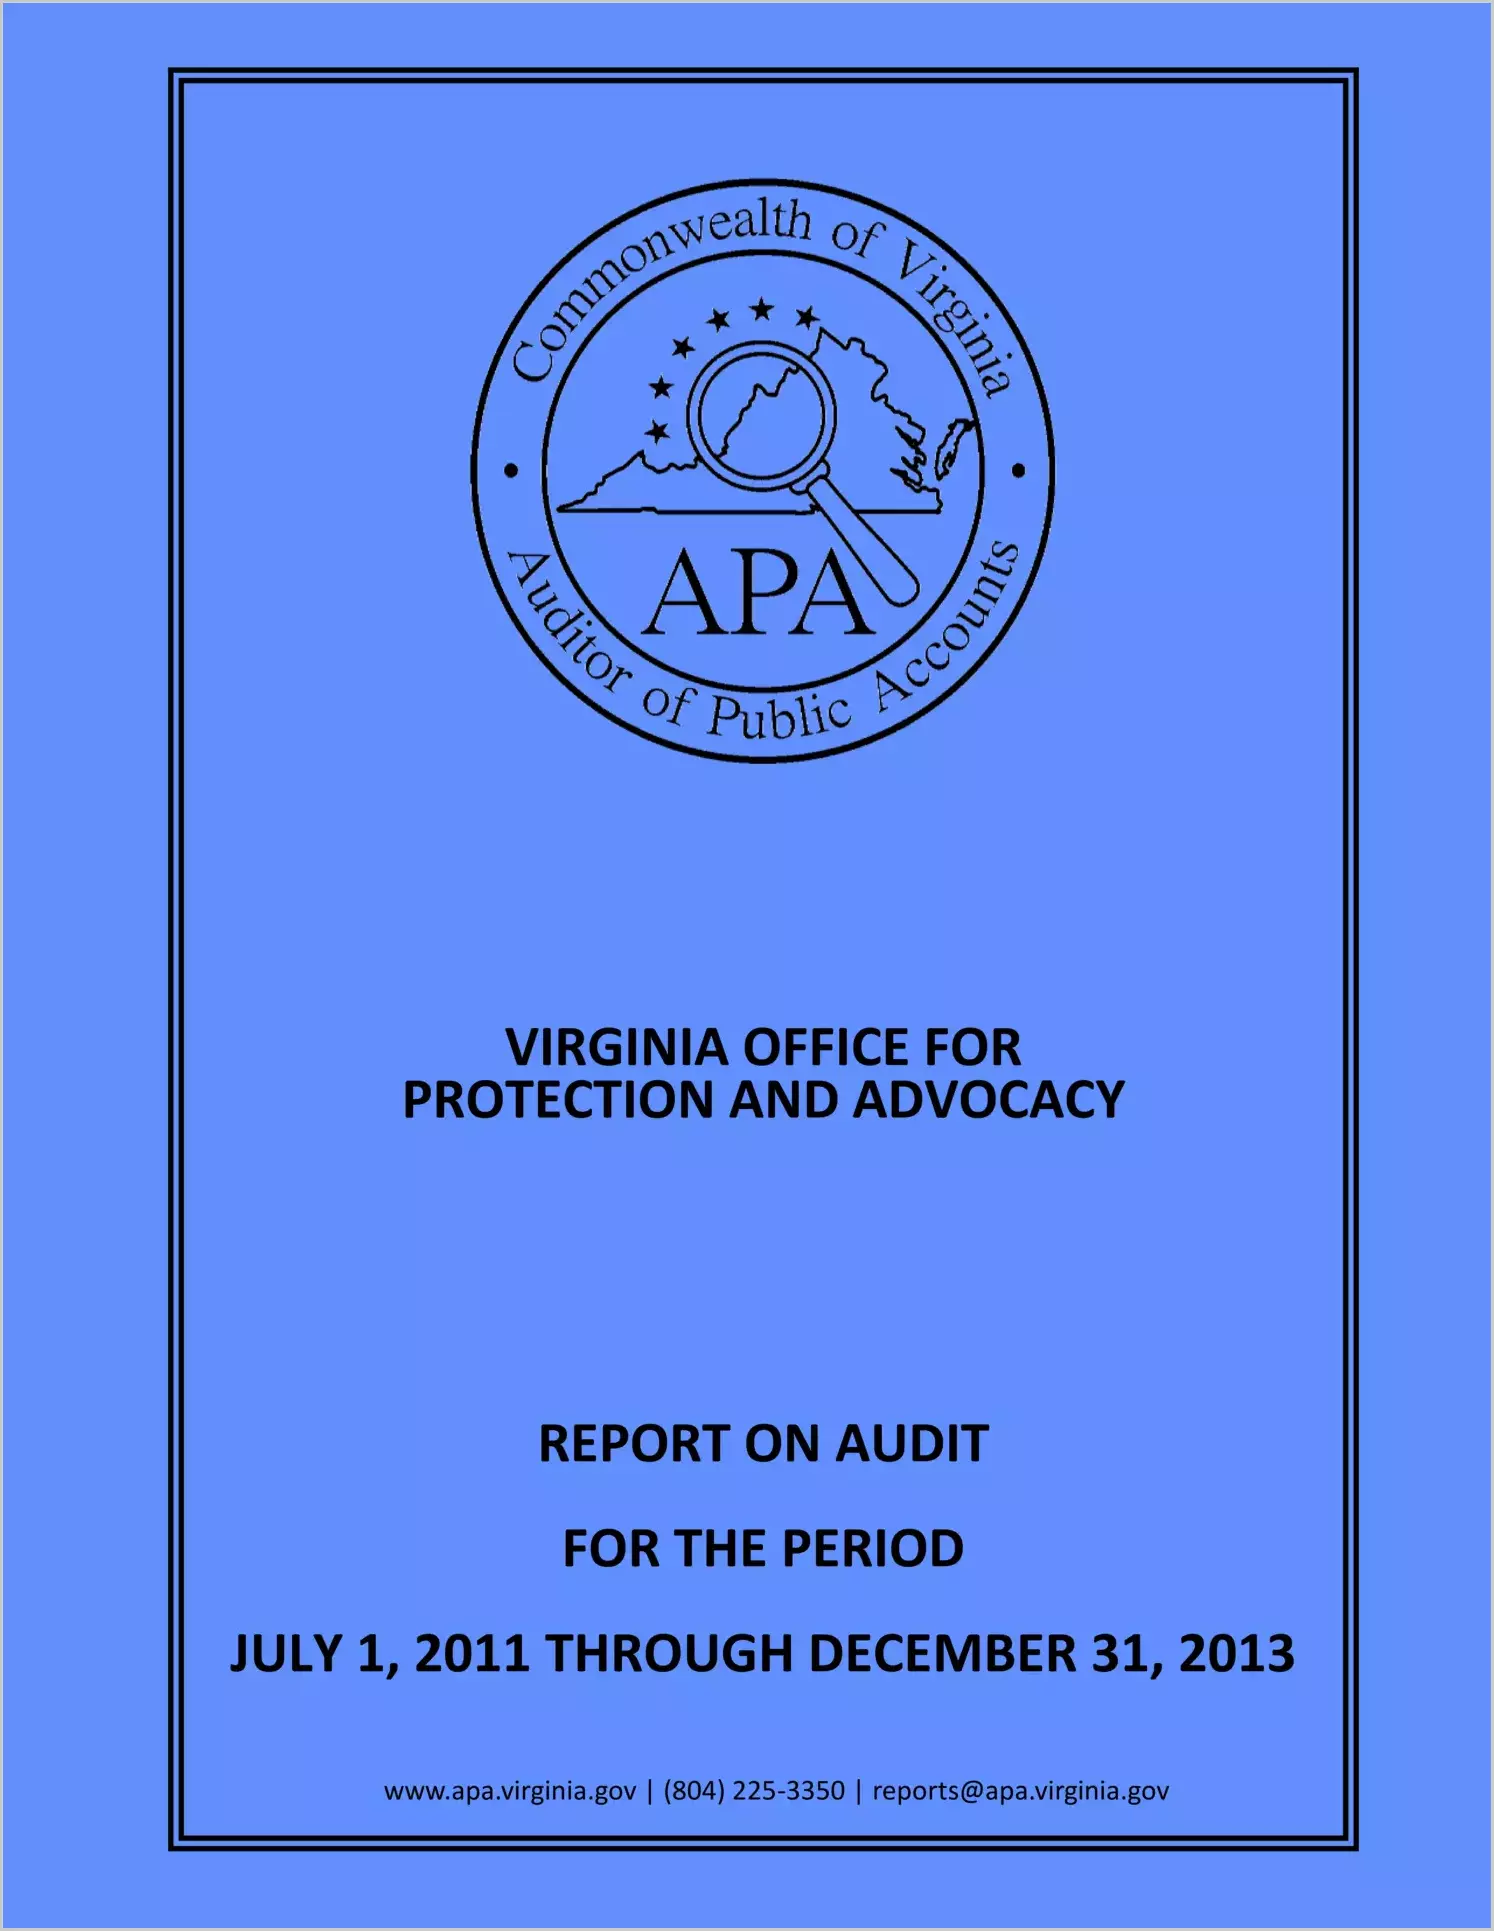 Virginia Office For Protection and Advocacy report on audit for the period July 1, 2011 through December 31, 2013